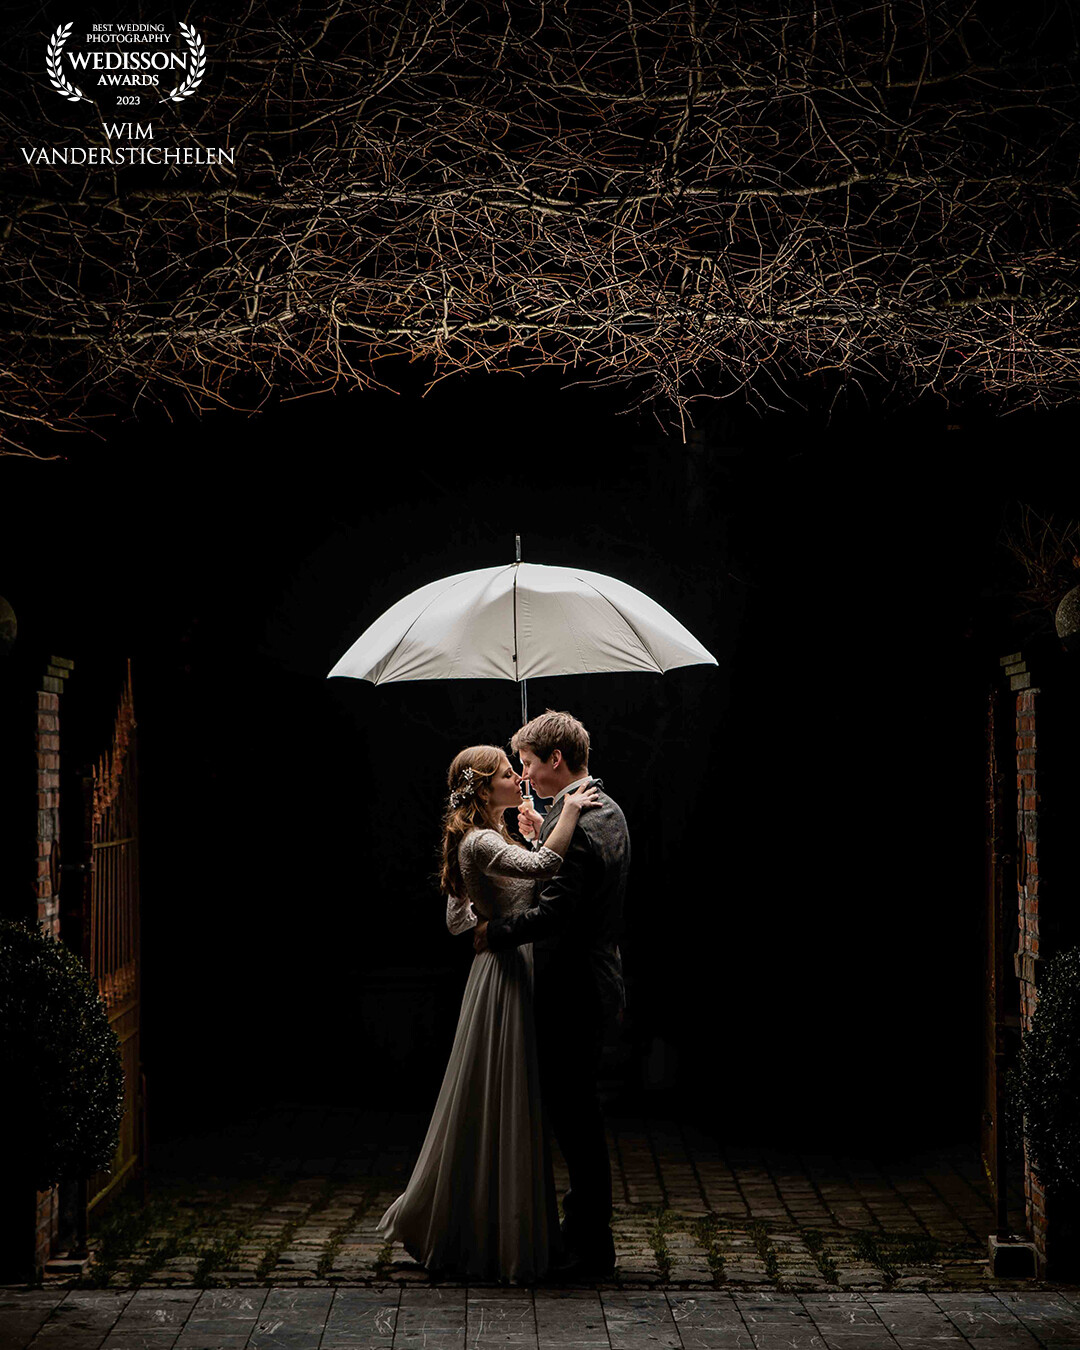 This couple had a white umbrella ready for the rain on their big day. That day was a very sunny day in january, but I allready knew that I was going to get a great picture with it at night. For this result I used a flash bouncing up the light in the umbrella.